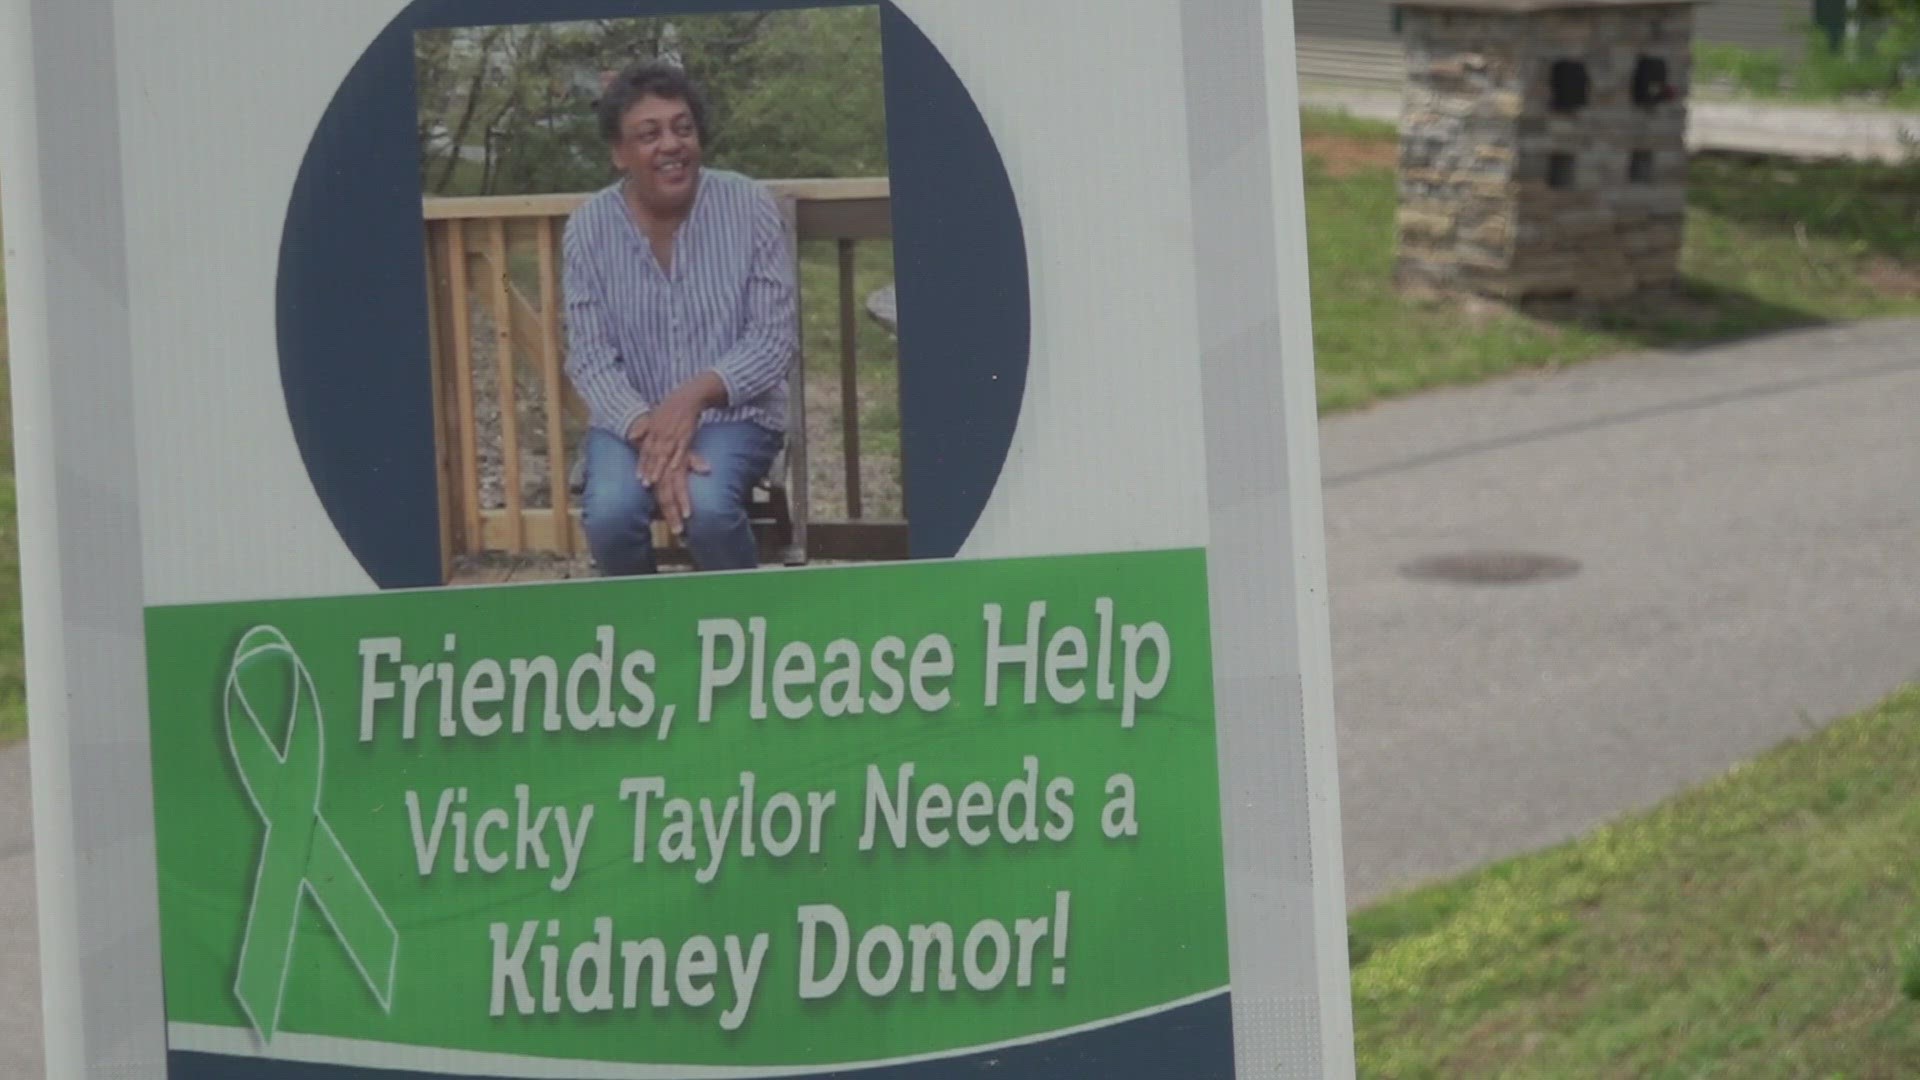 "I came to find out I and he was a 99% match. That was a miracle," said Vicky Taylor about her organ donor.